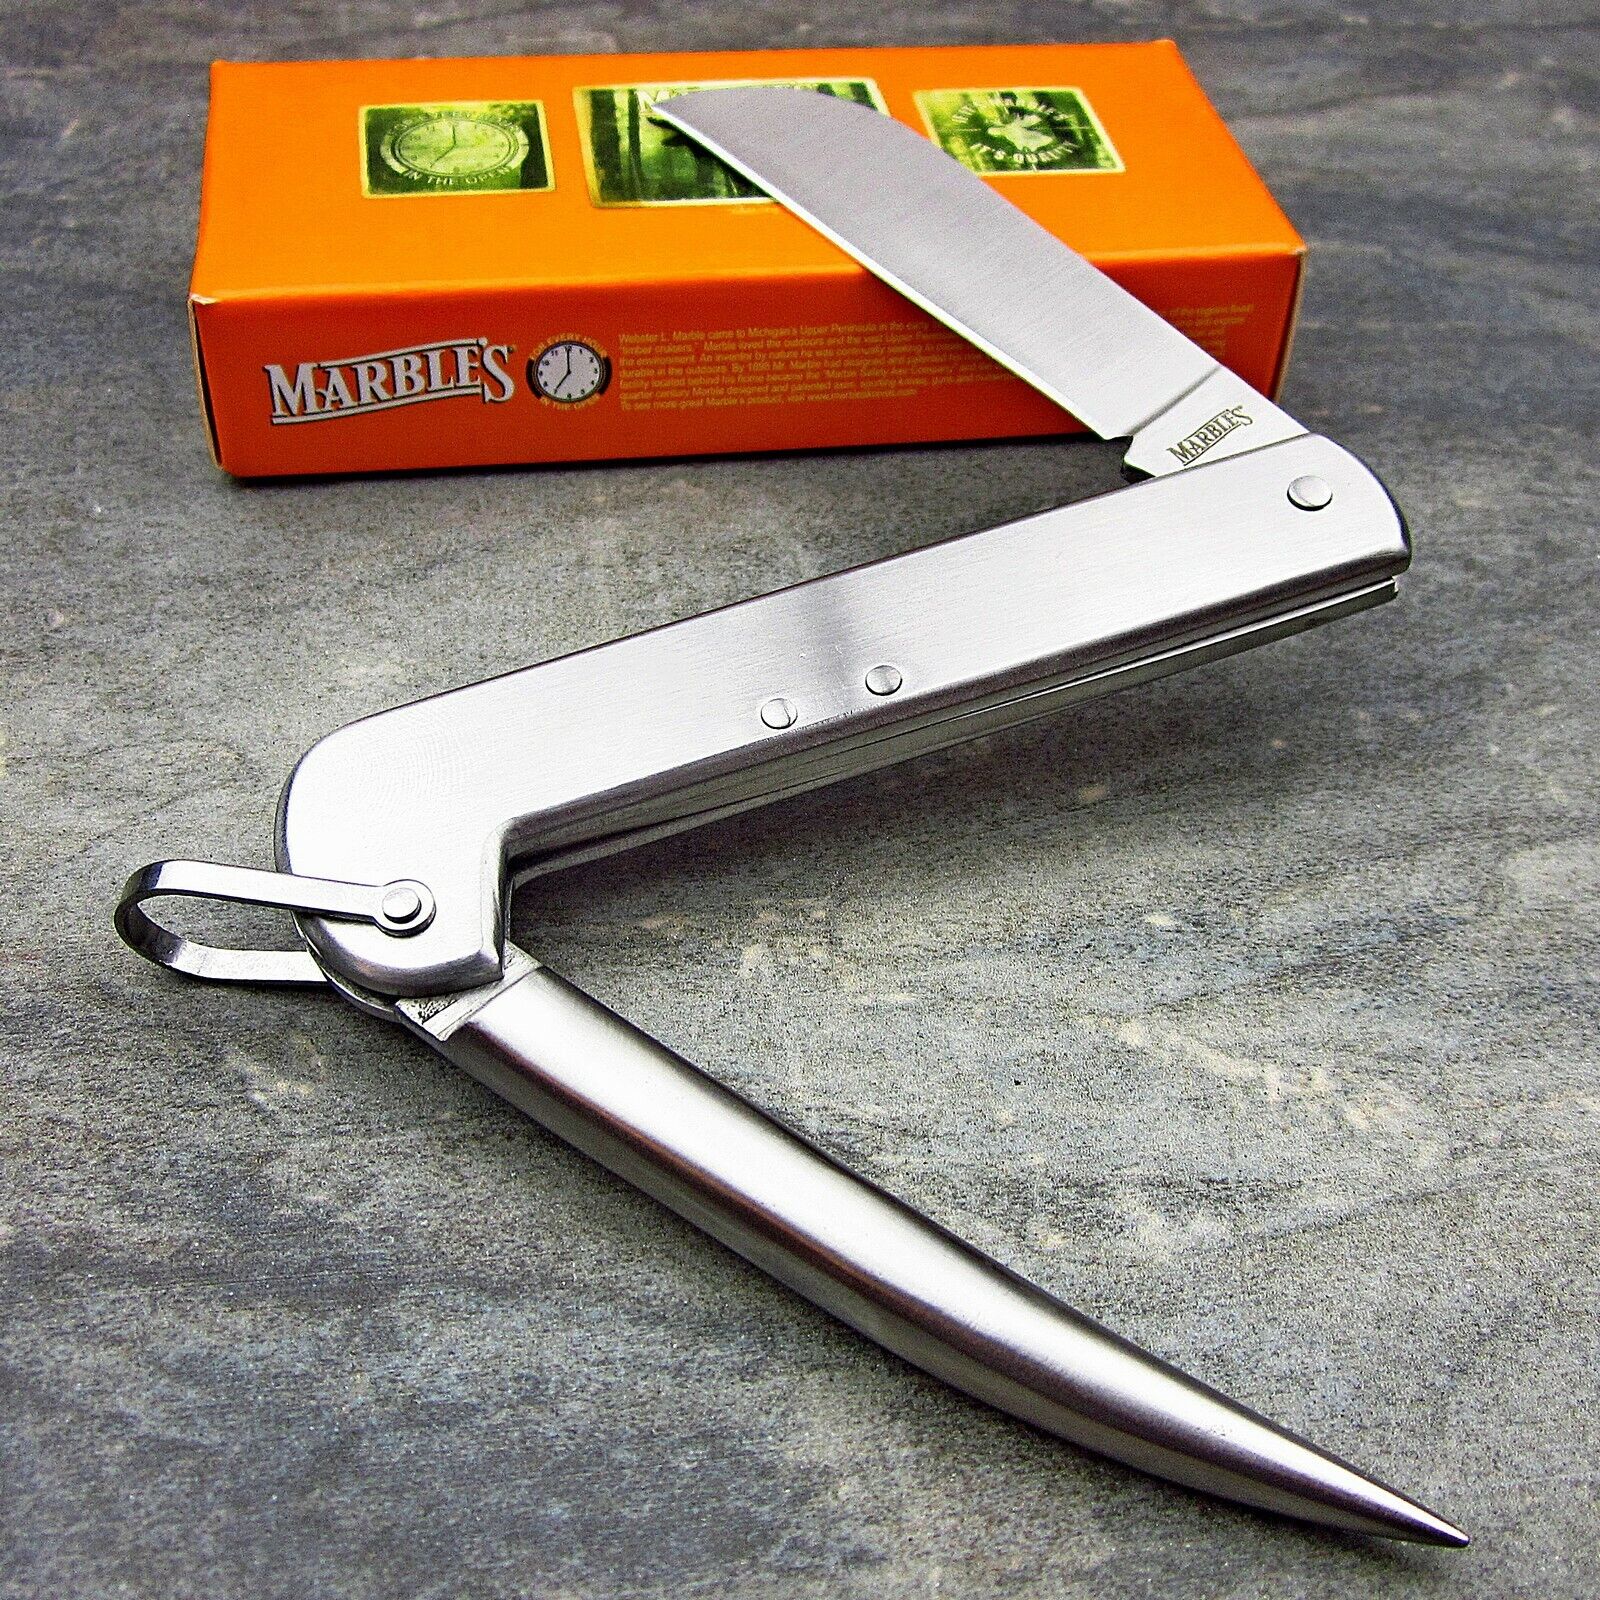 Marble's All Stainless Sailor's Marlin Spike Boat Riggers Folding Pocket Knife